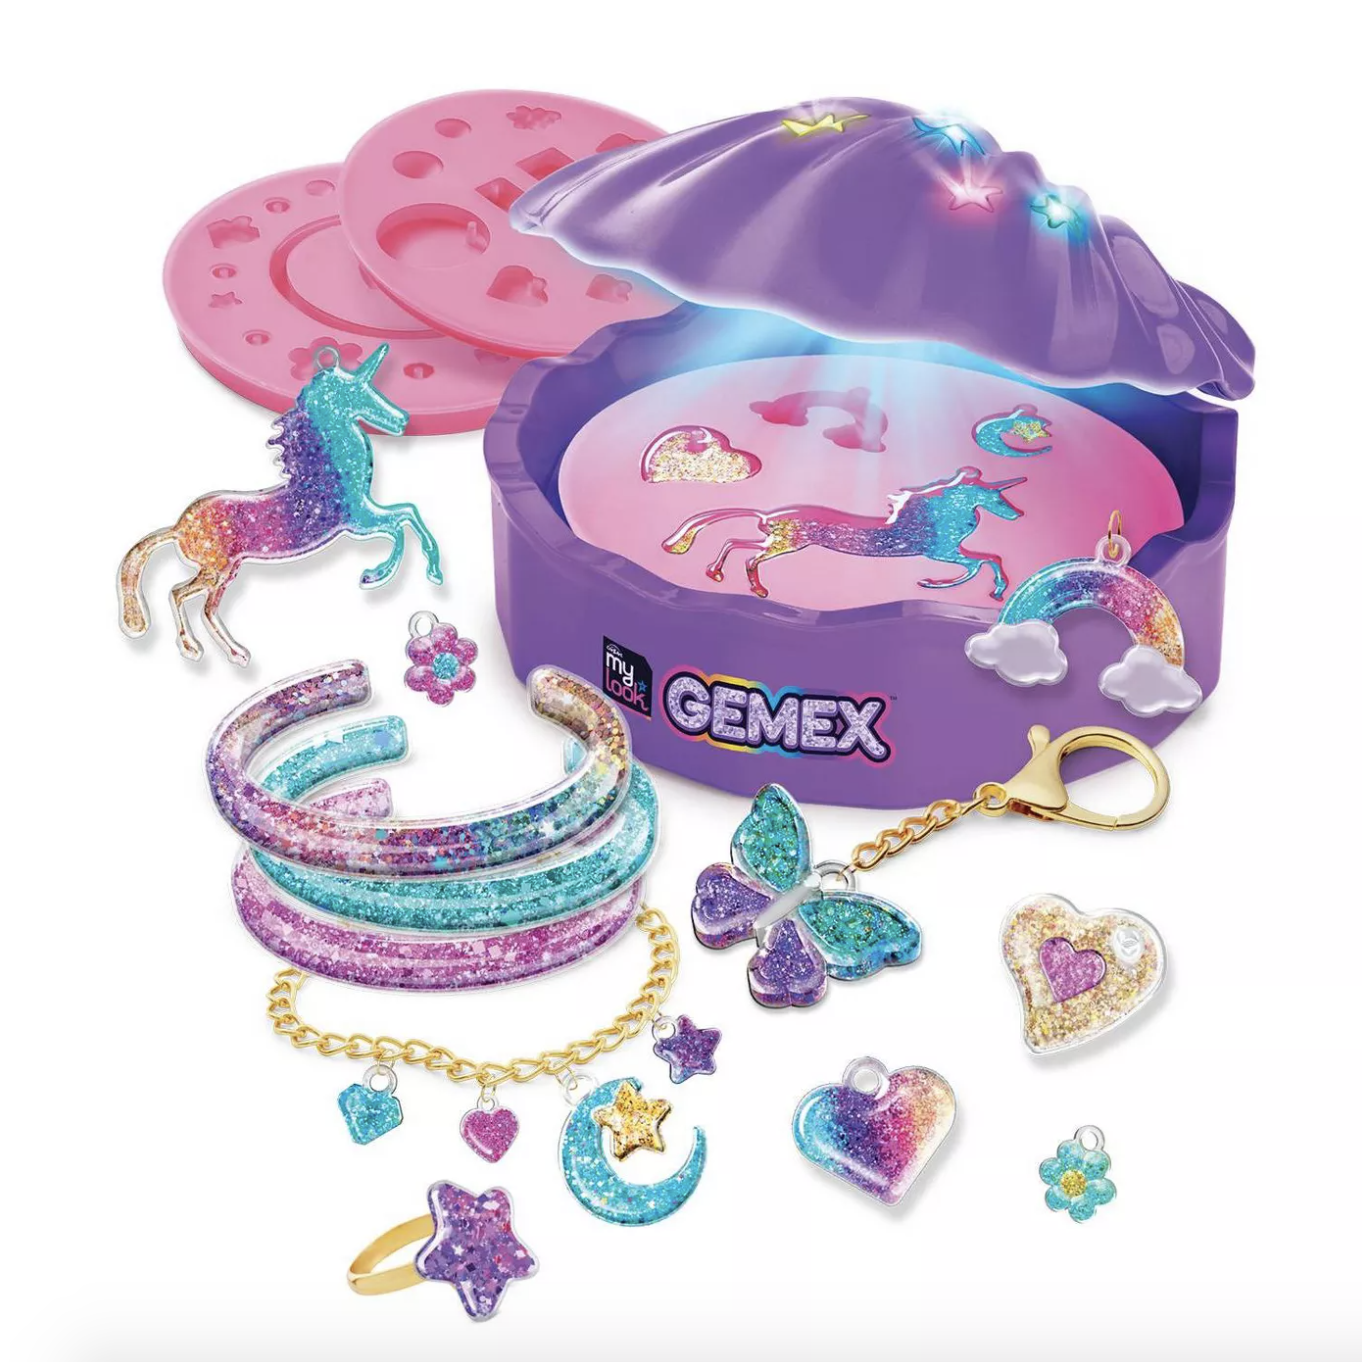 Most Awesome Toys and Gifts For 8 Year Old Girls 2022